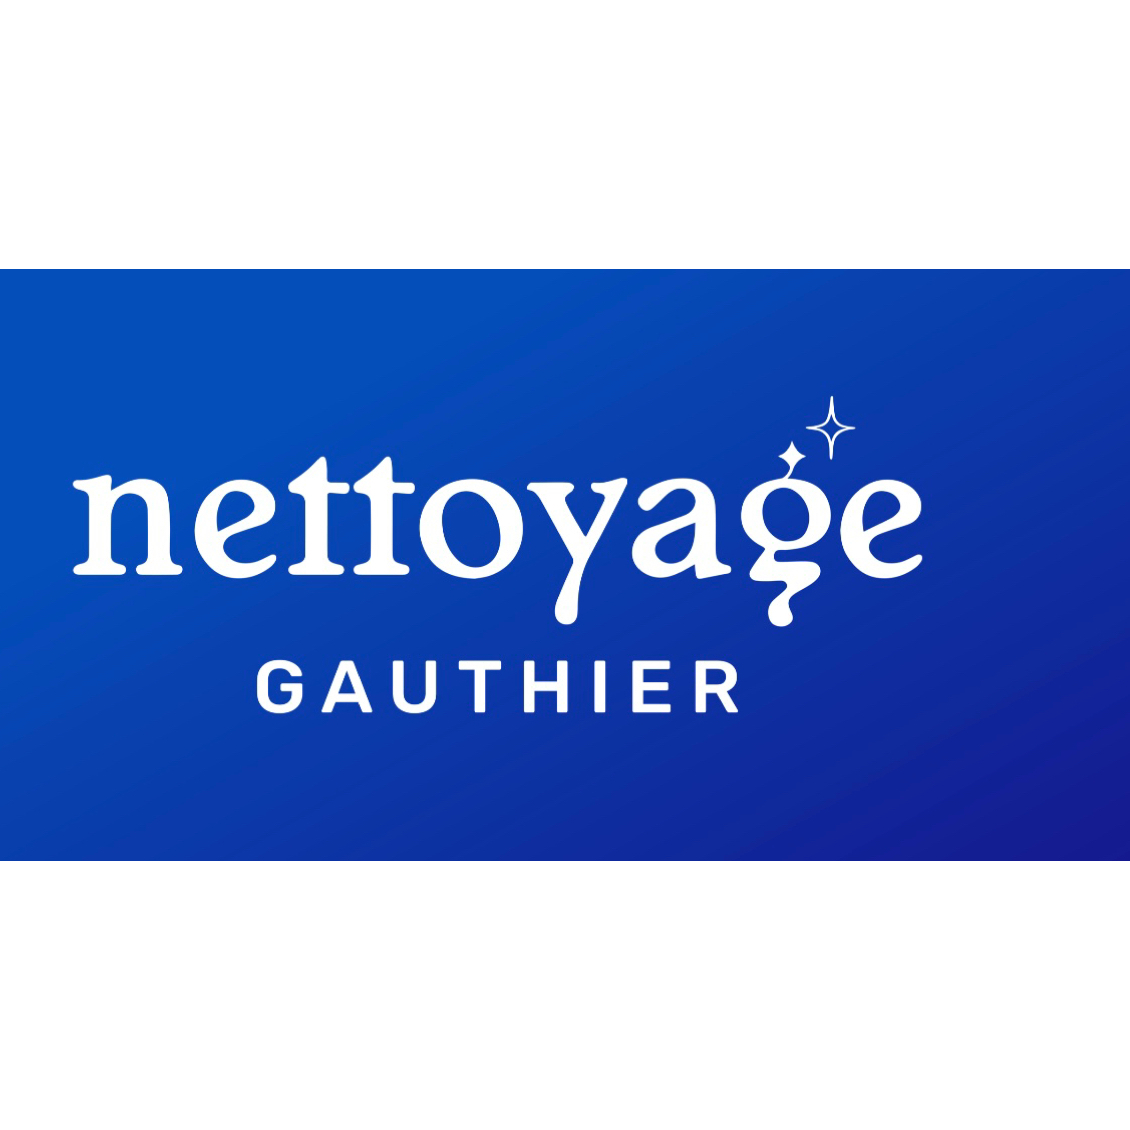 Nettoyage Gauthier